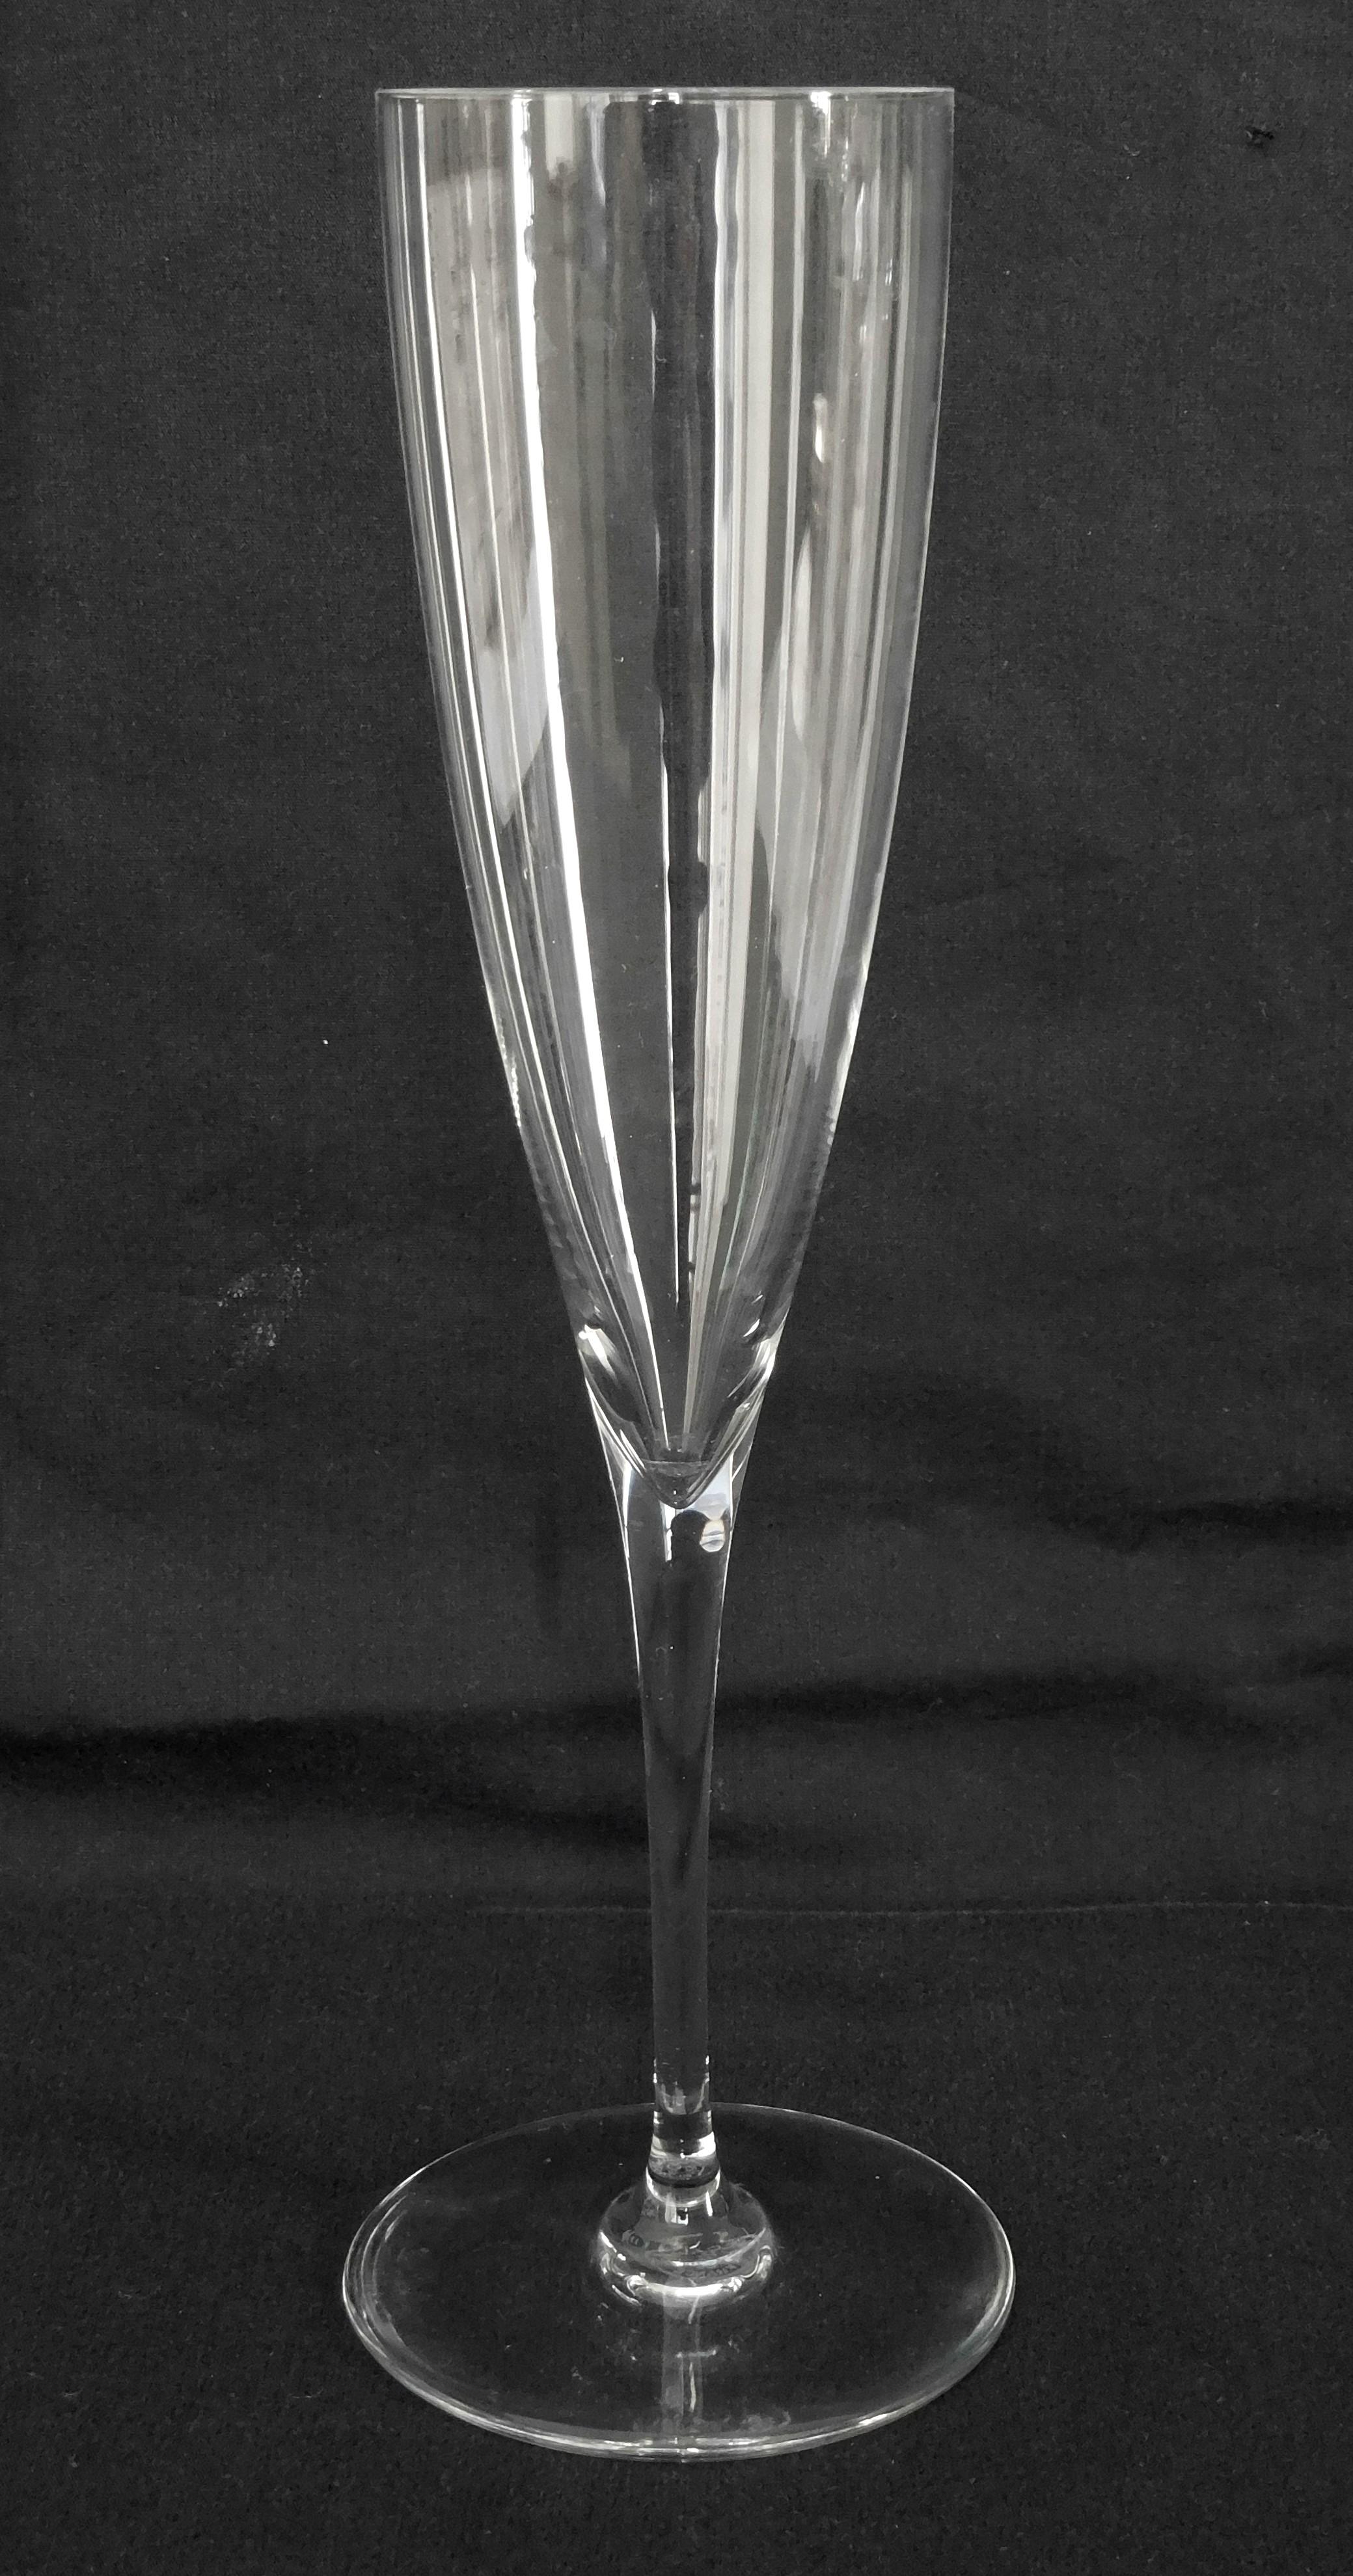 Modern 6 Baccarat crystal champagne flutes - Dom Perignon pattern - signed